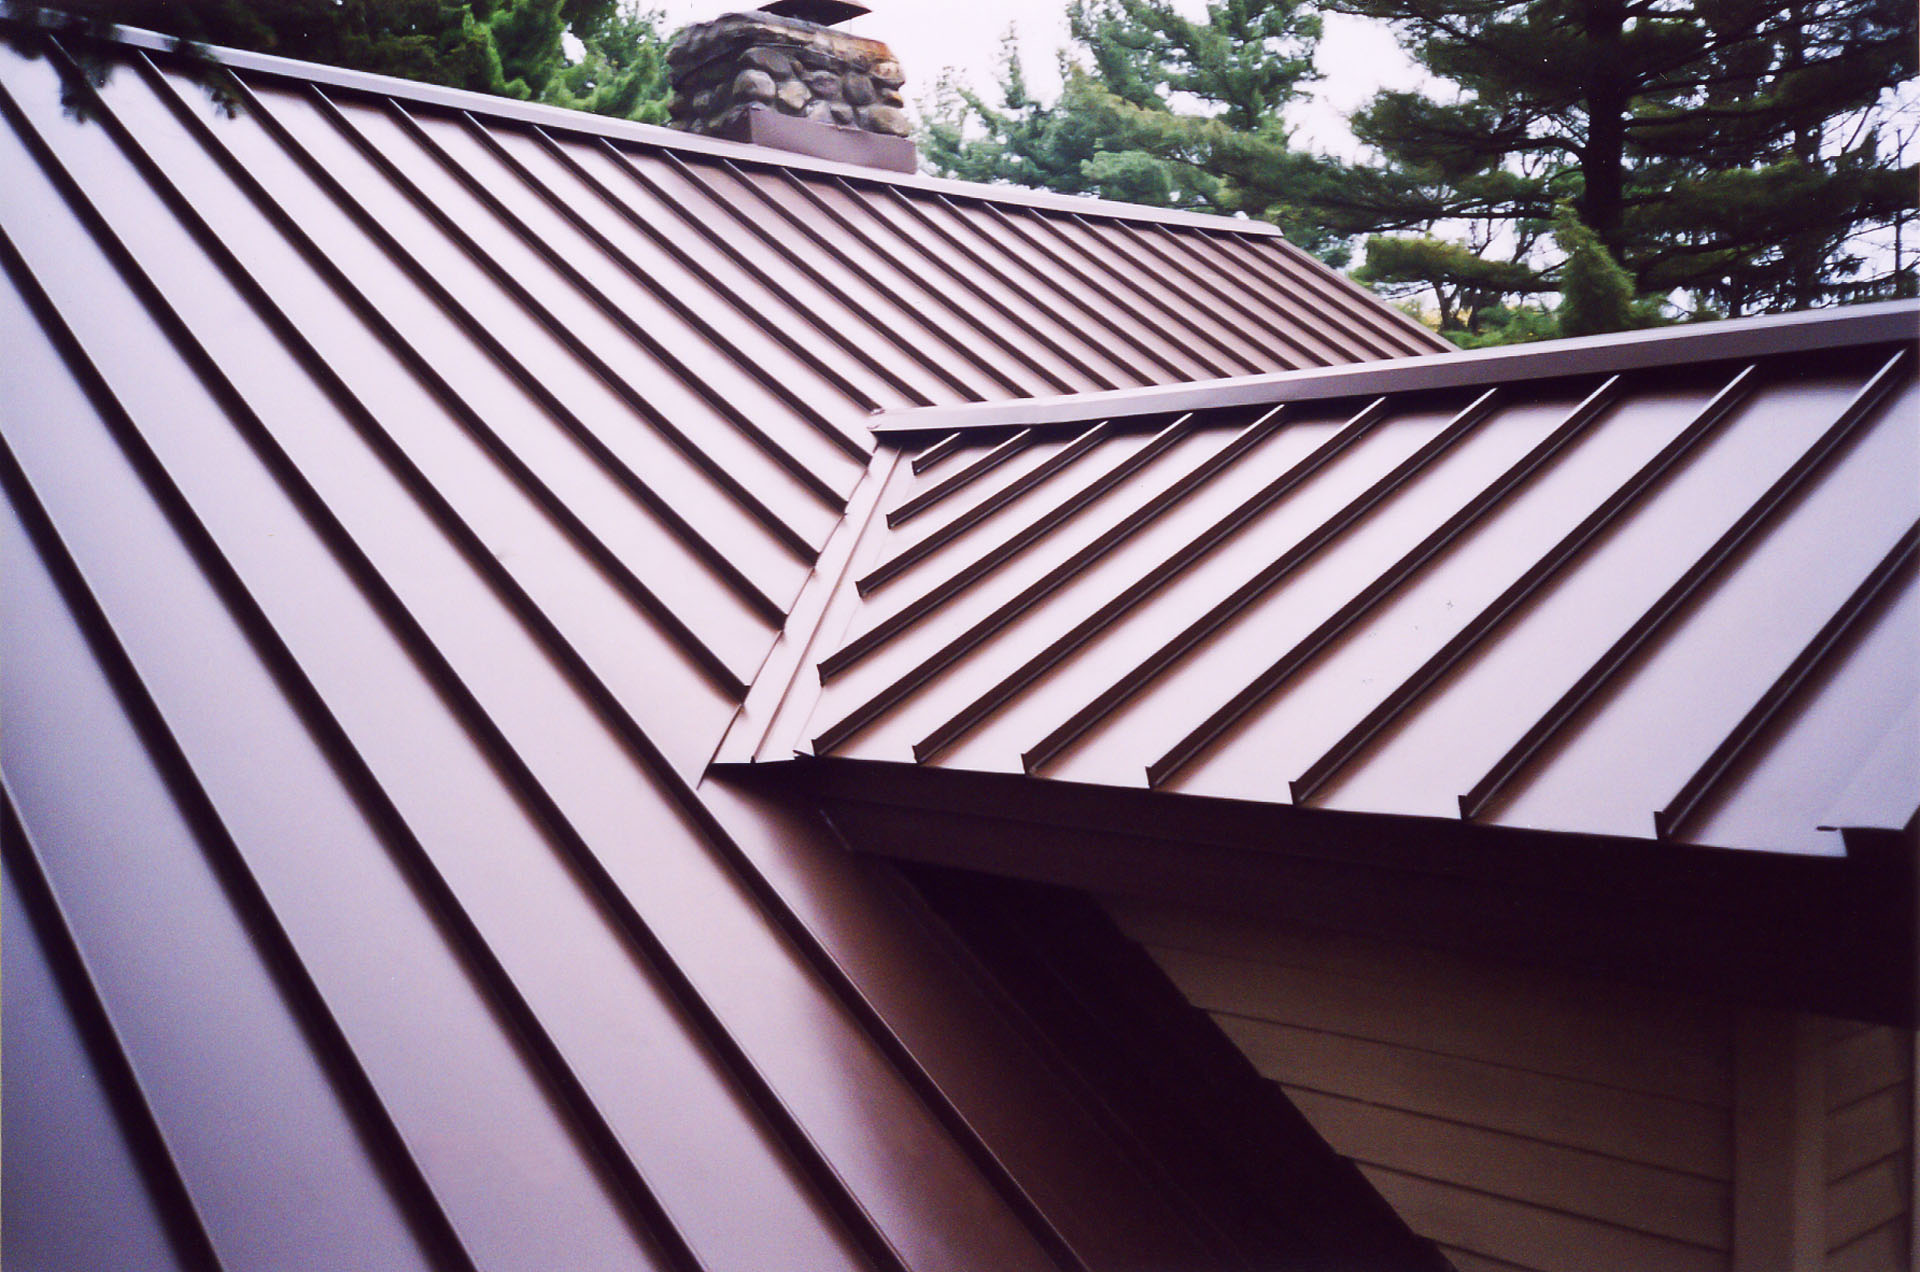 A standing seam metal roof.